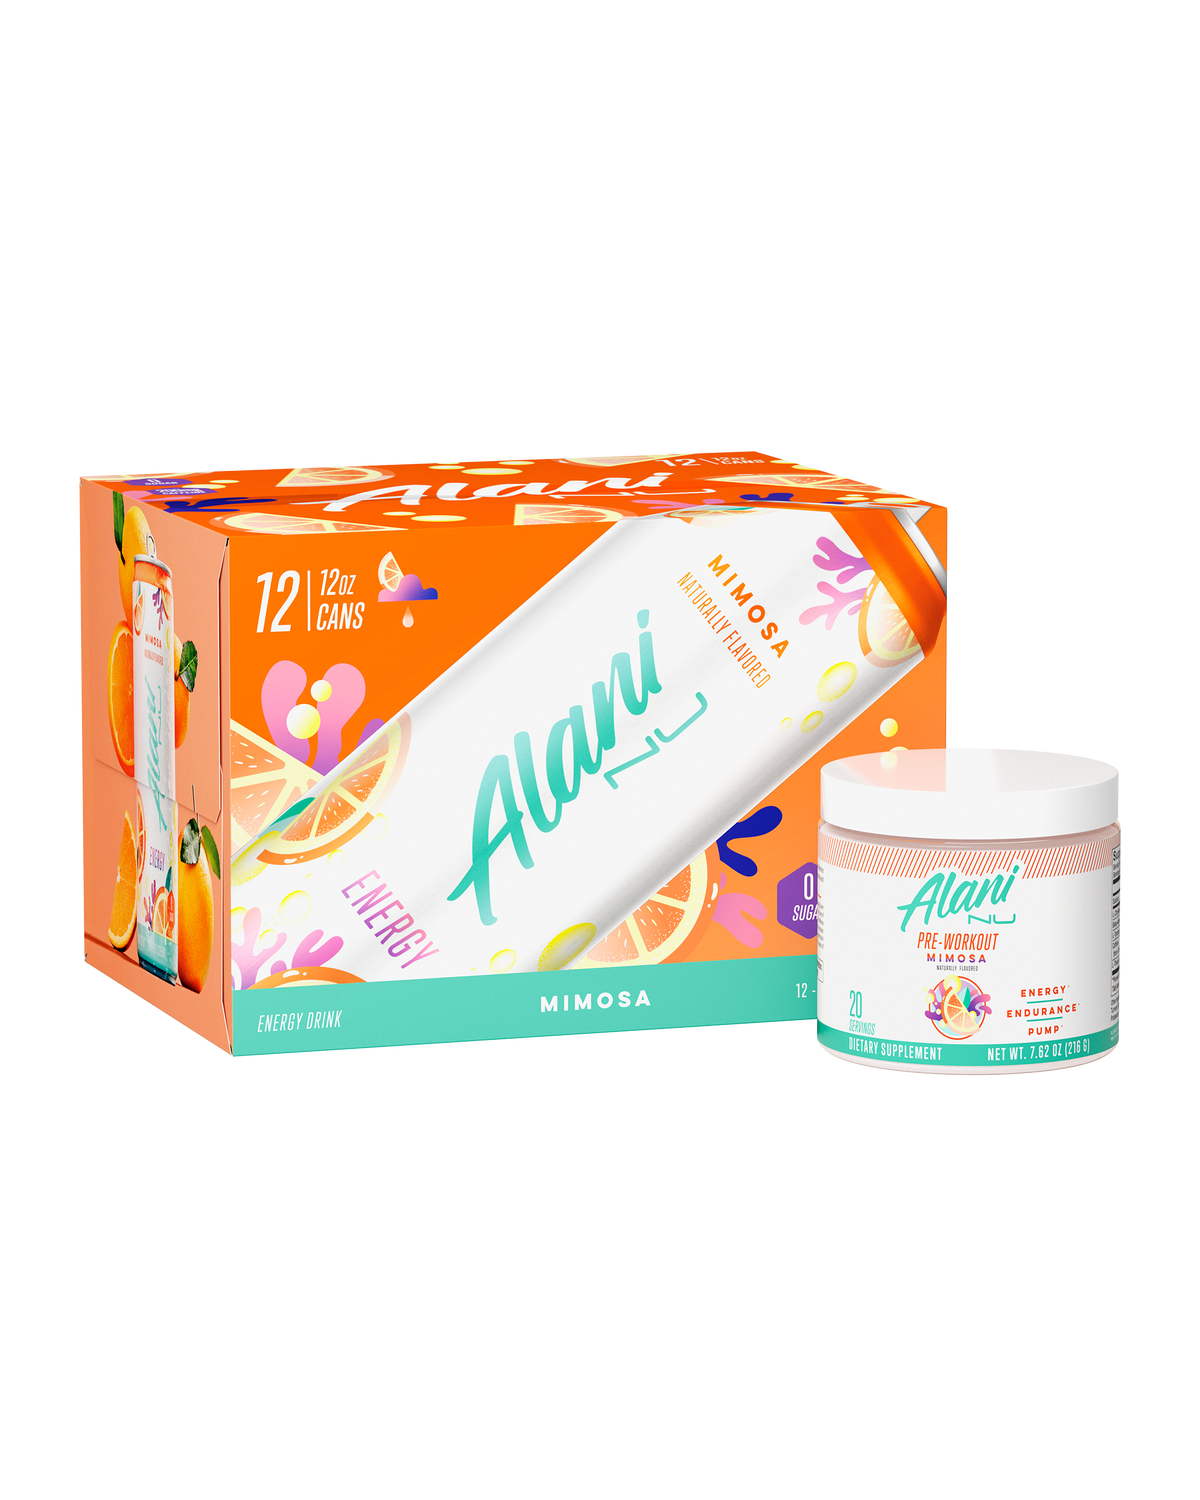 A 12 pack of Alani Nu's Mimosa-flavored energy drinks and a container of Alani pre-workout supplement in Mimosa flavor, both featuring vibrant, citrus-themed graphics.